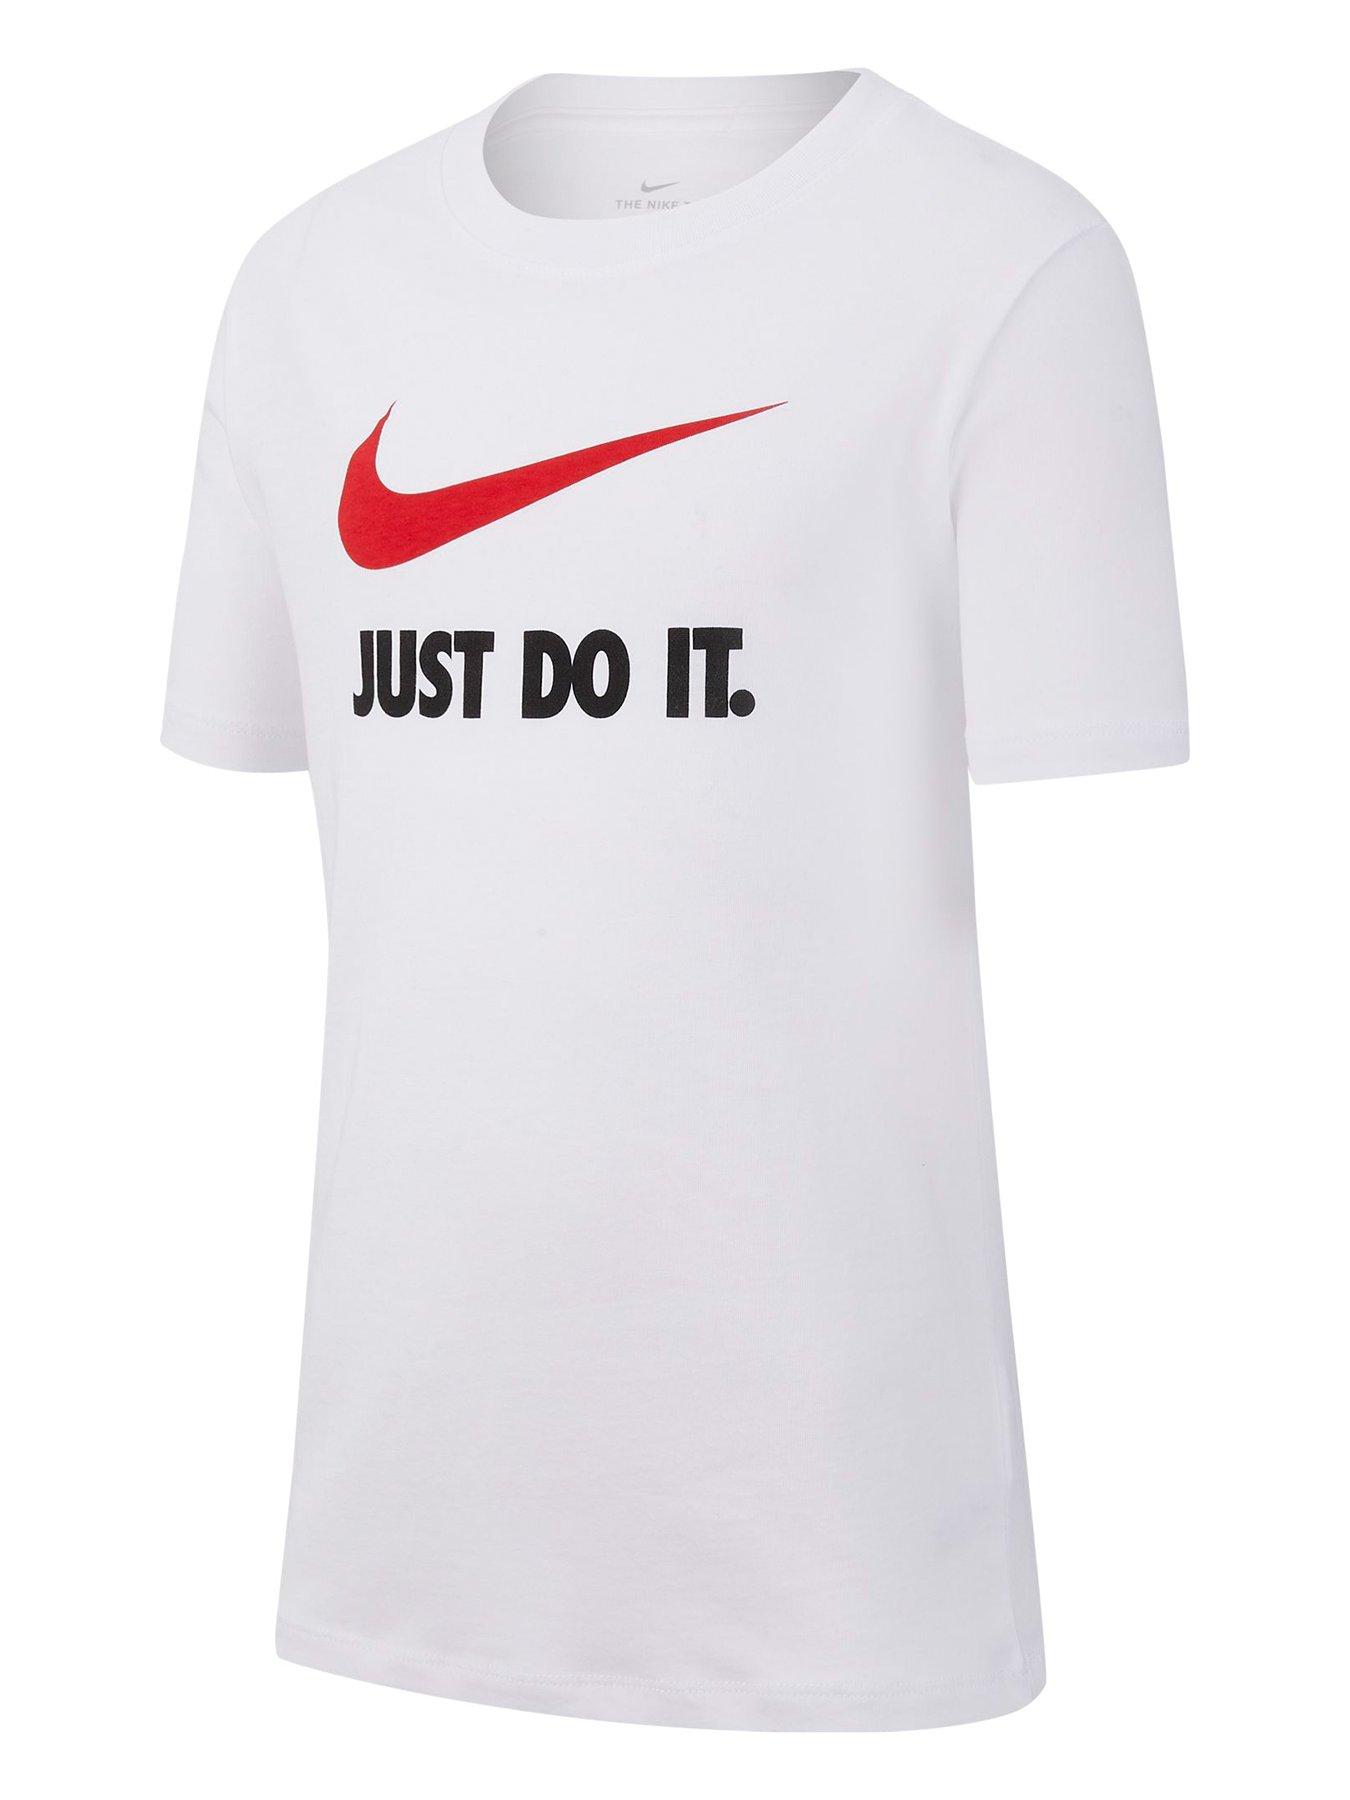 white red and blue nike shirt